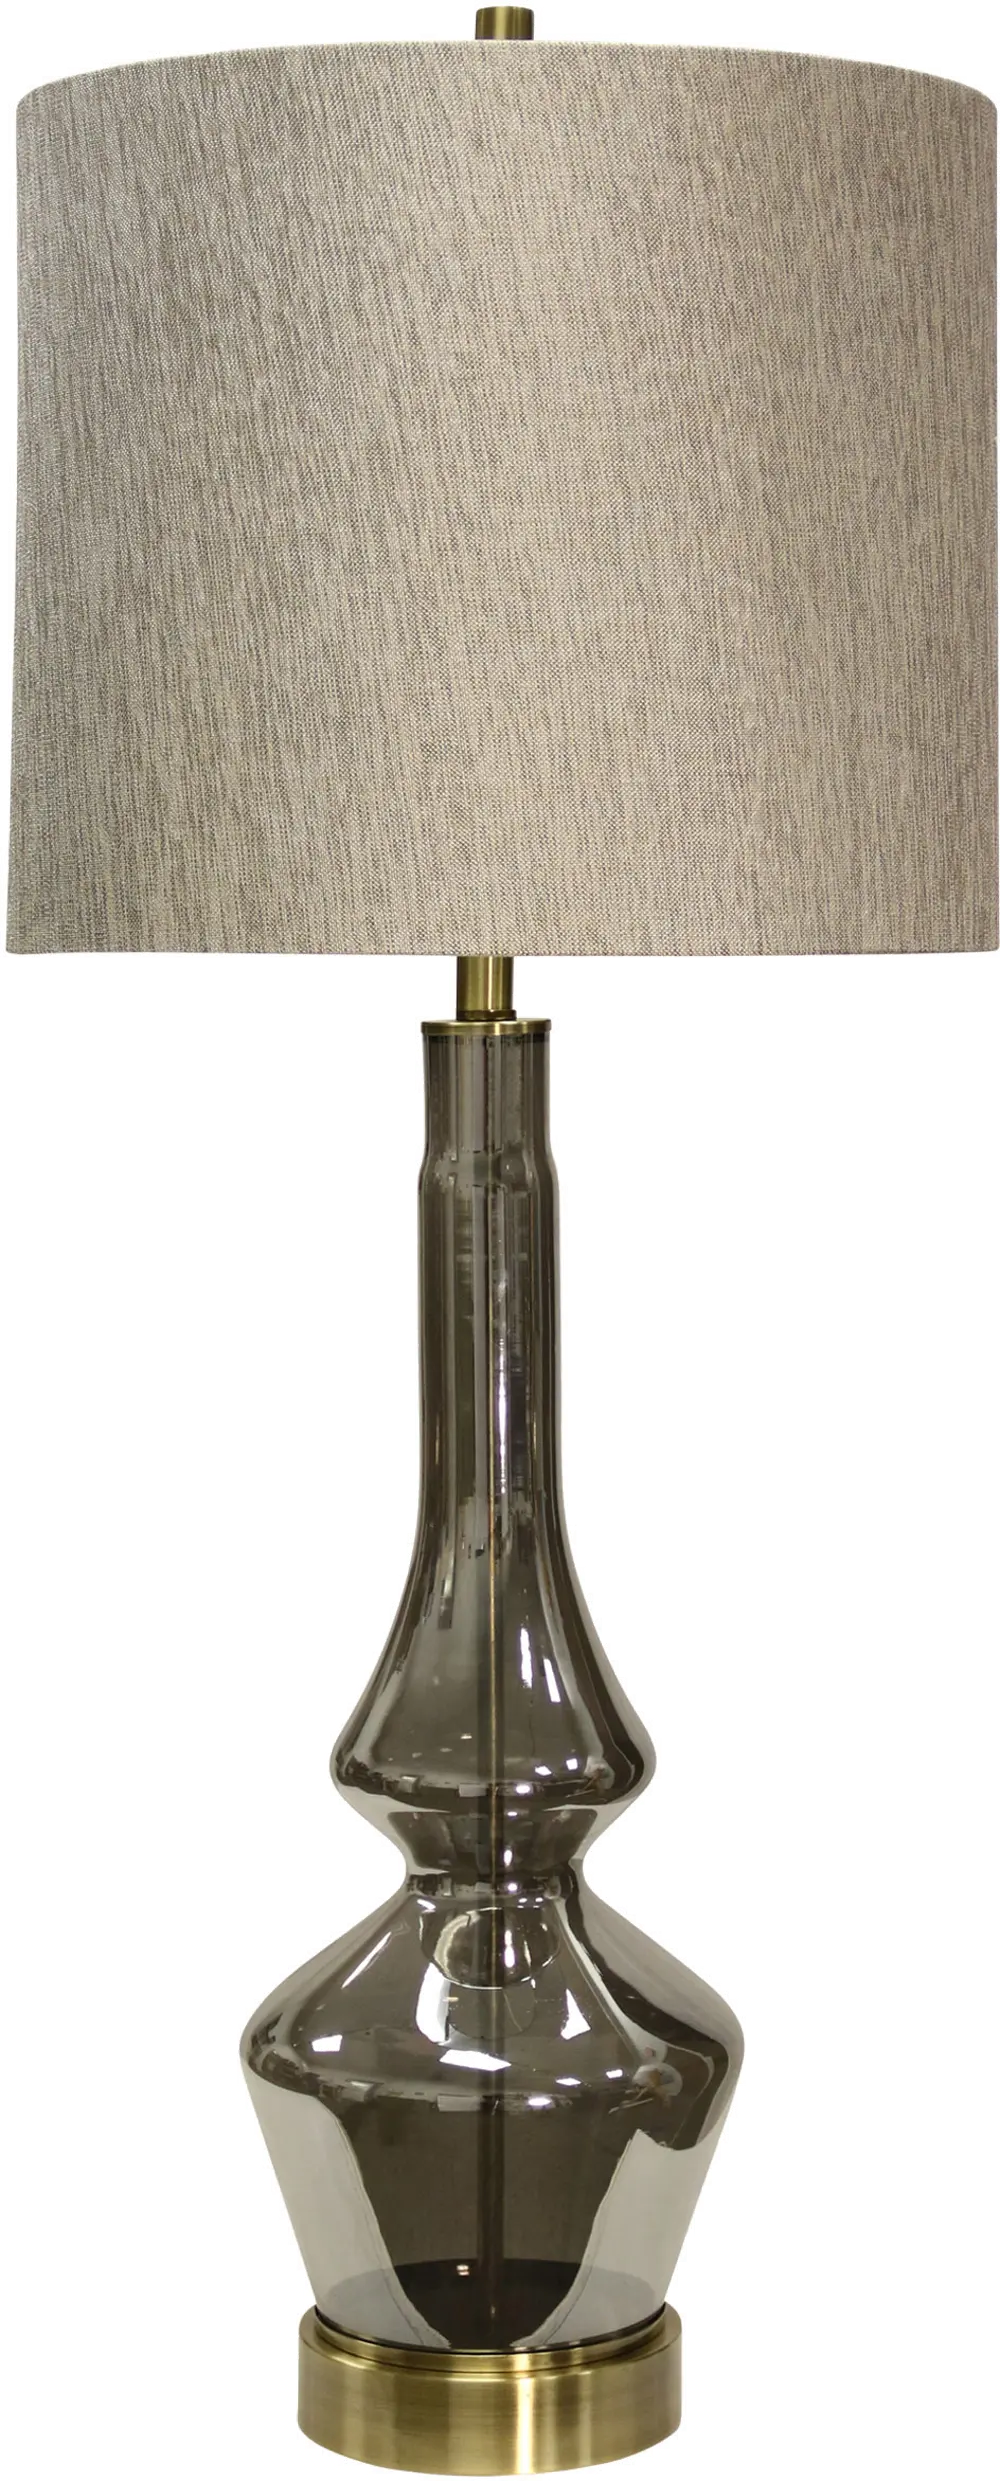 Gray Smoke Glass Table Lamp with Brass Metal Accents - Burgetts-1